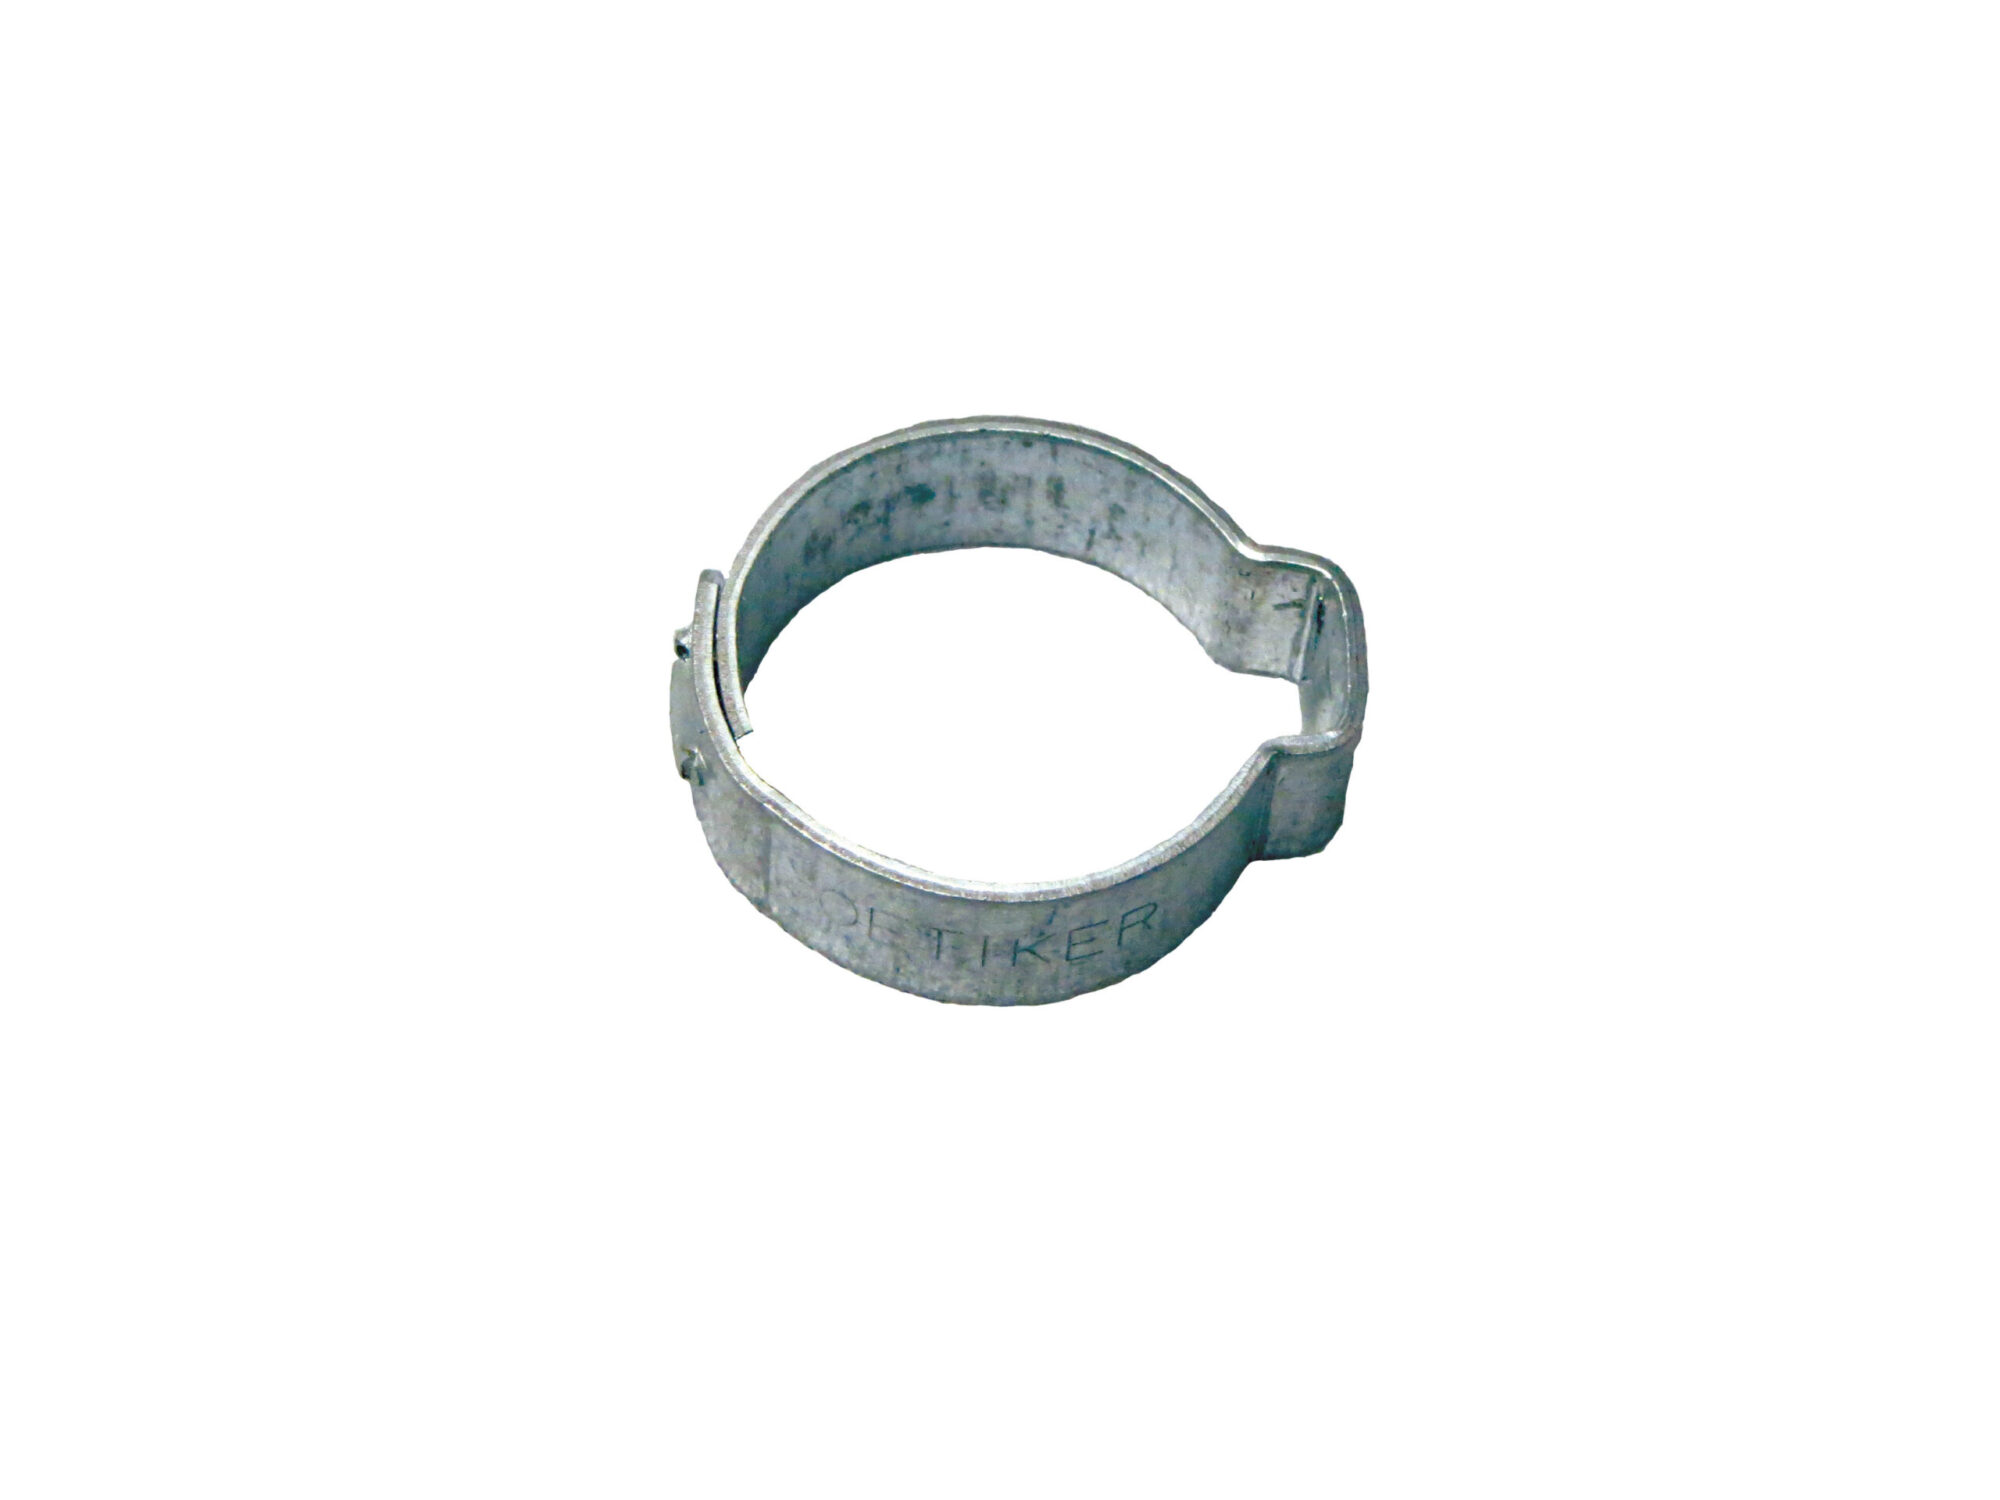 1525 Plated Oetiker Clamp